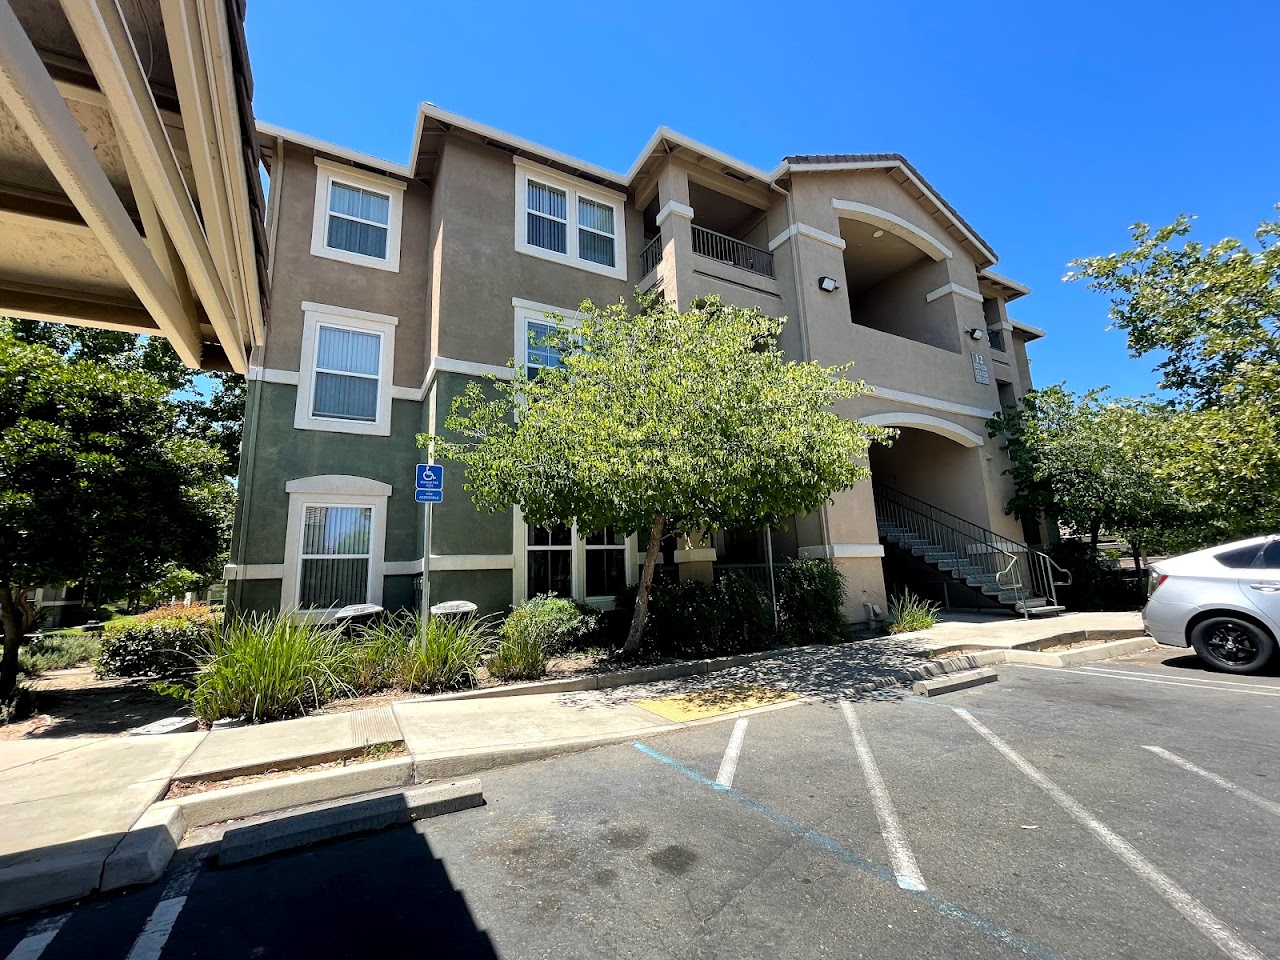 Photo of NORDEN TERRACE APTS. Affordable housing located at 3685 ELKHORN BLVD NORTH HIGHLANDS, CA 95660